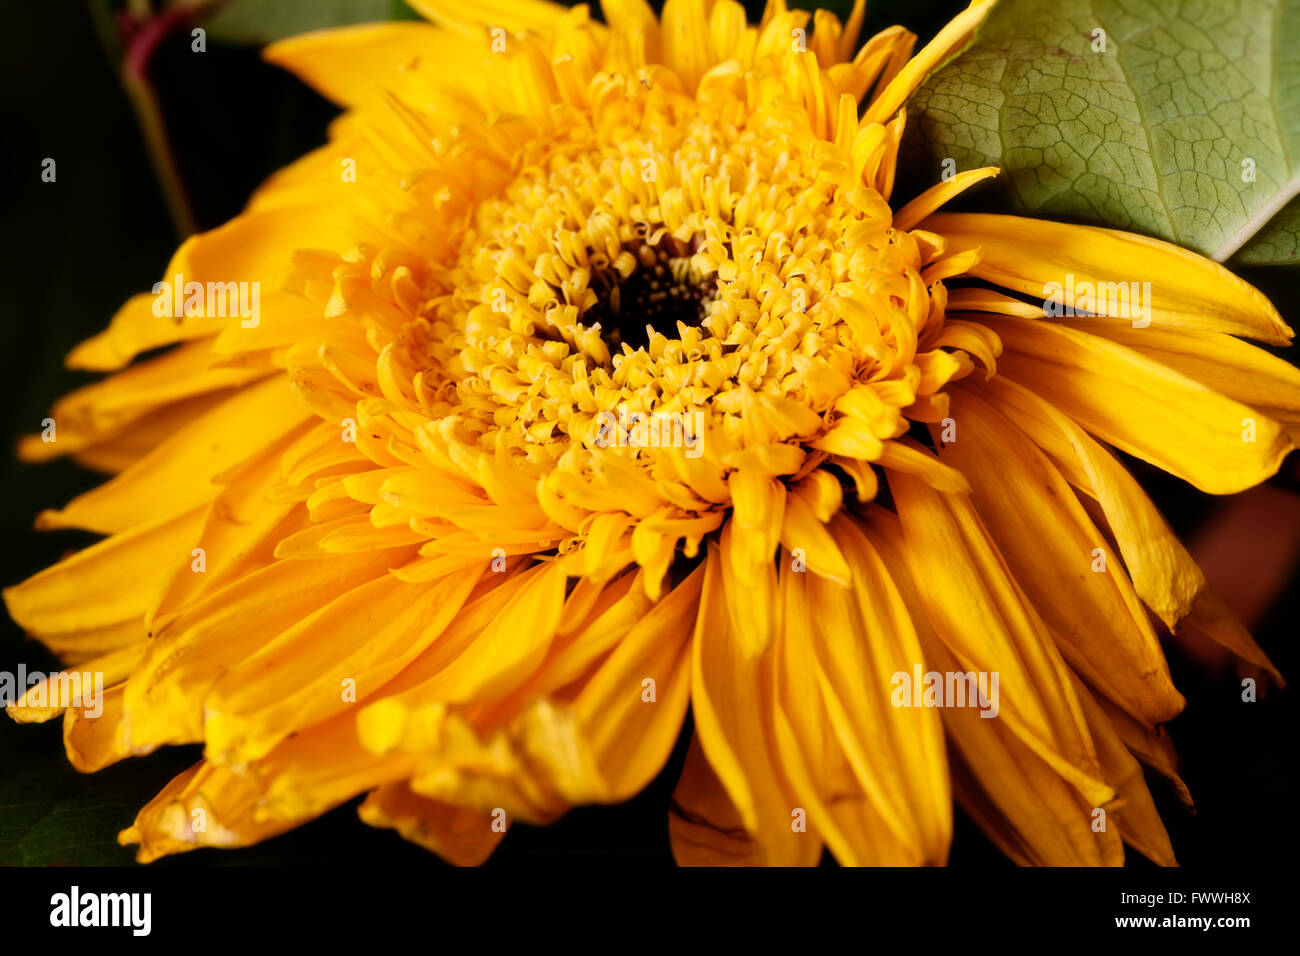 Tight Shot Of Yellow Flower And Green Leaves Stock Photo